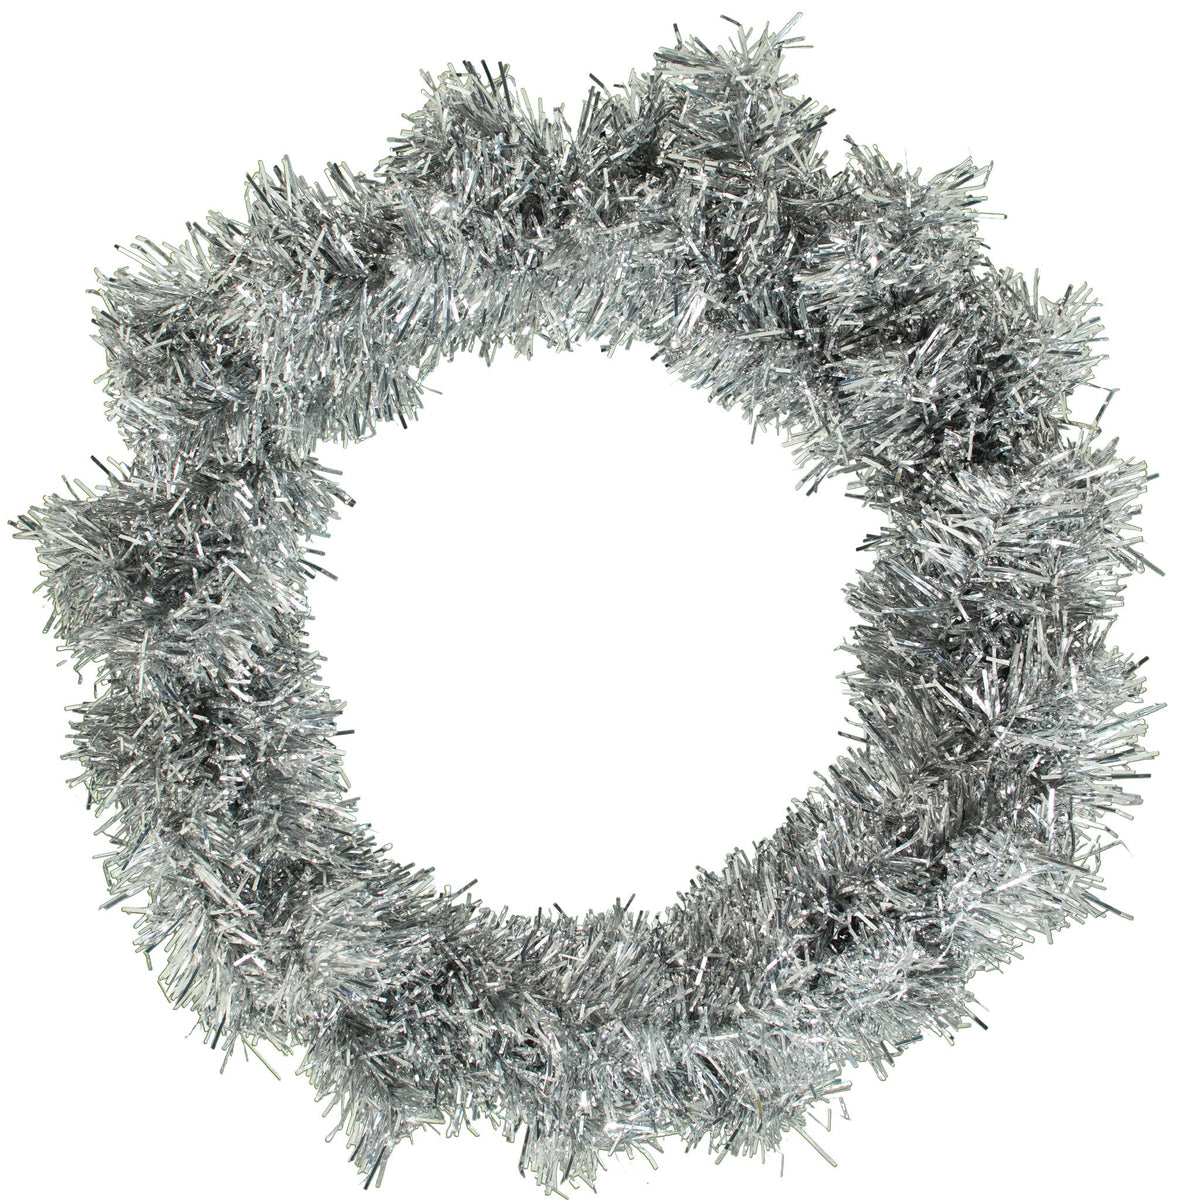 Tinsel Wreaths come with the branches unshaped.  You will need to shape the branches when you take the wreath of the box.